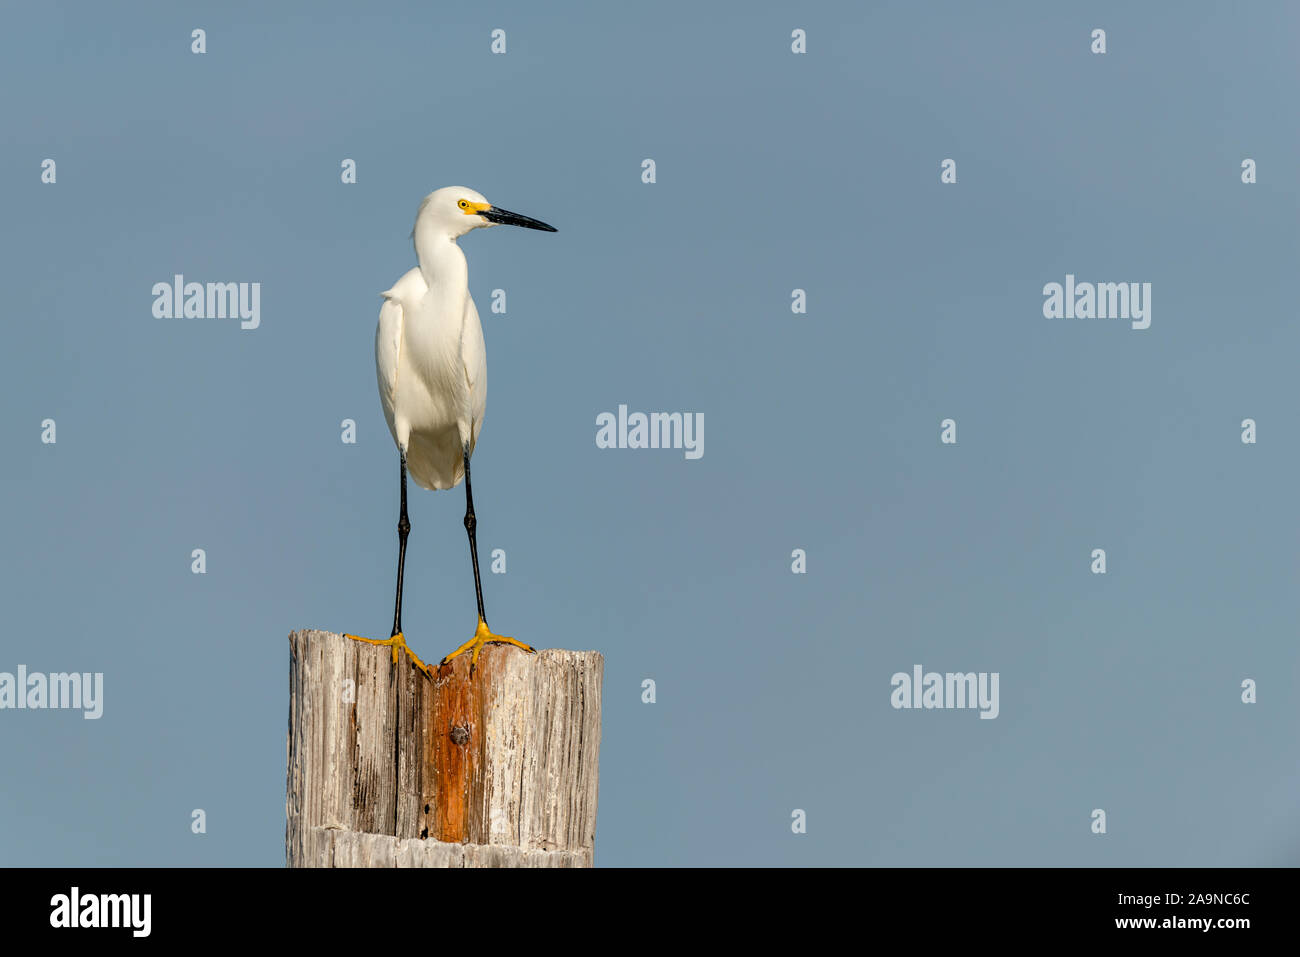 Snowy egret standing on a post with ocean as a background Stock Photo